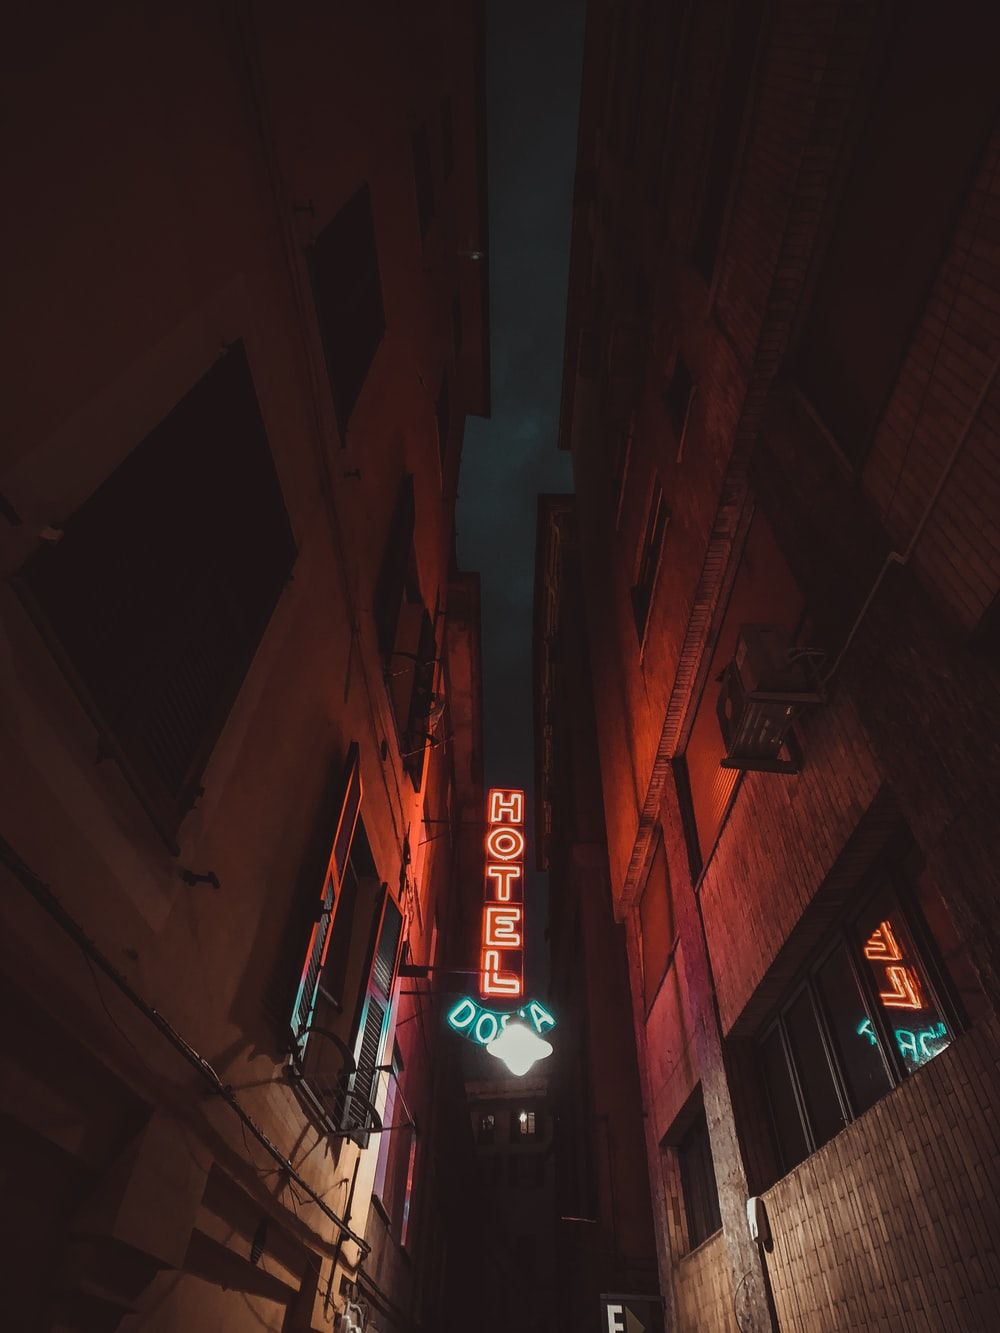 Neon Street Picture. Download Free Image